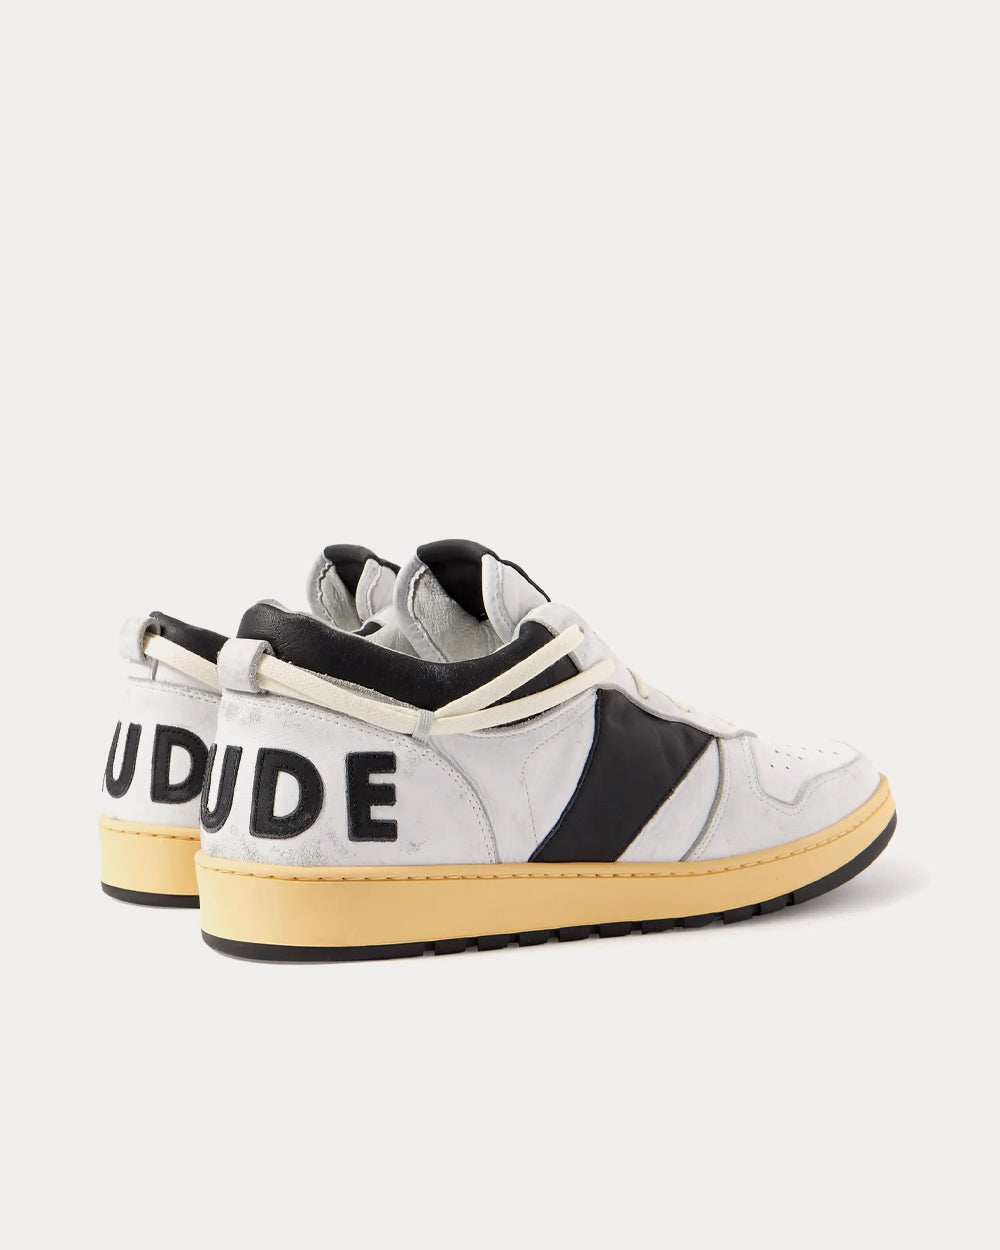 Rhude - Rhecess Distressed Leather White / Black Low Top Sneakers